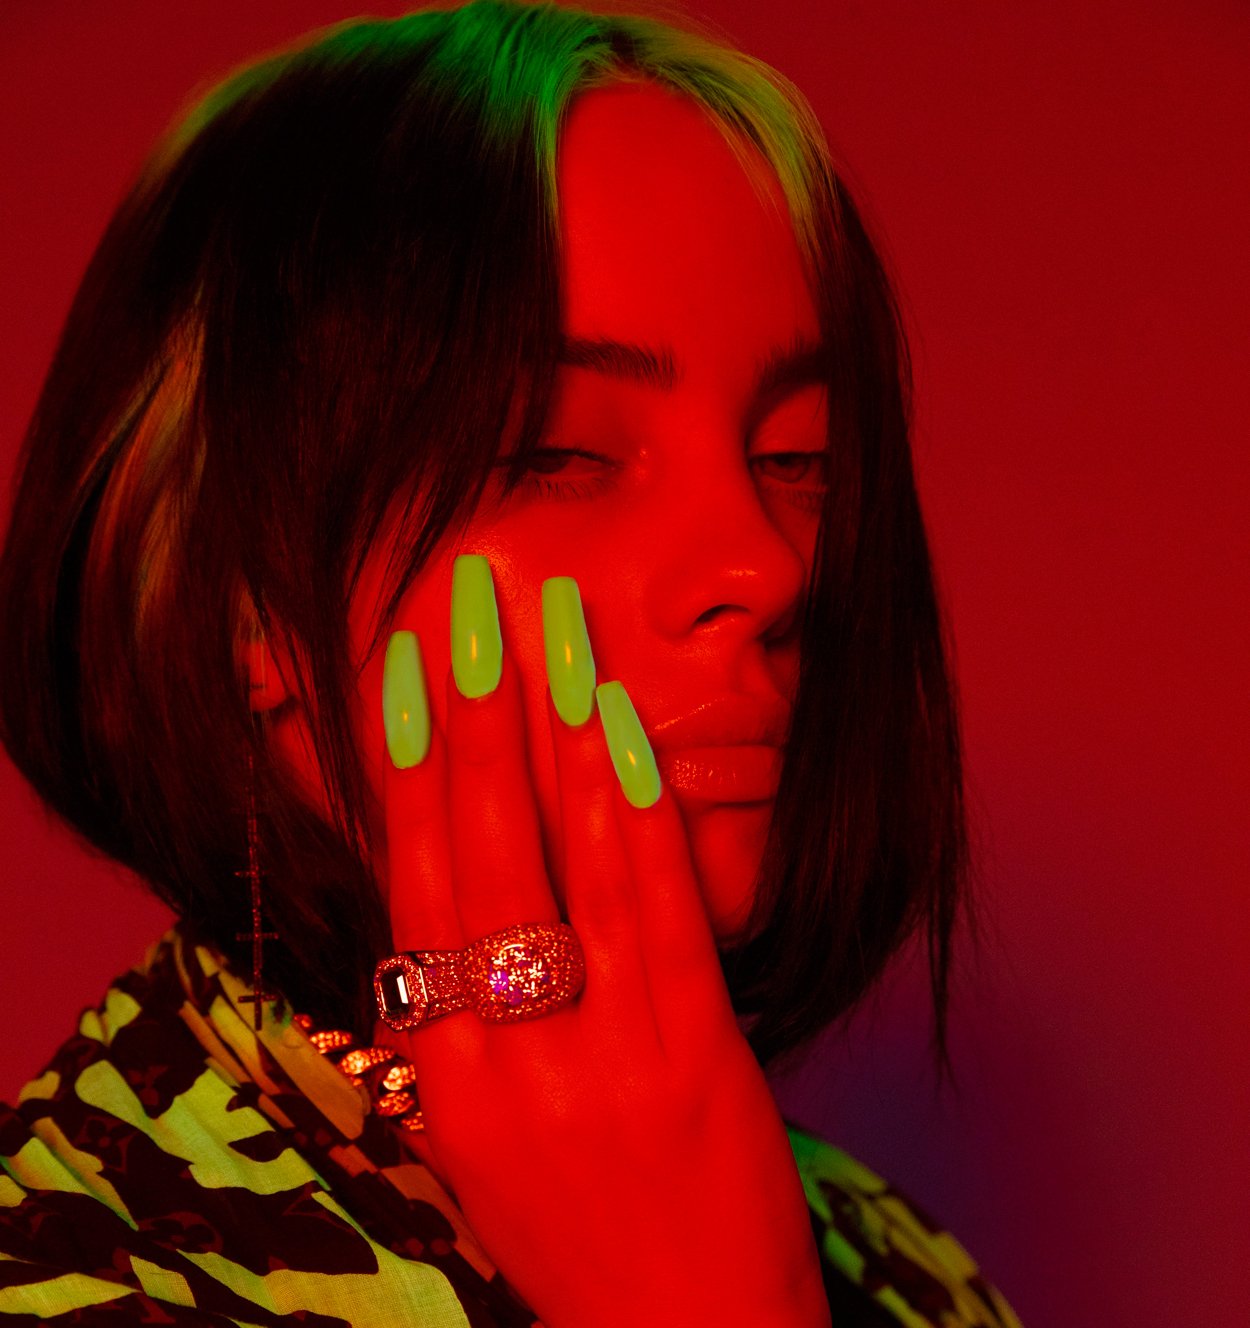 BILLIE EILISH shares new track 'everything i wanted' - Listen Now 